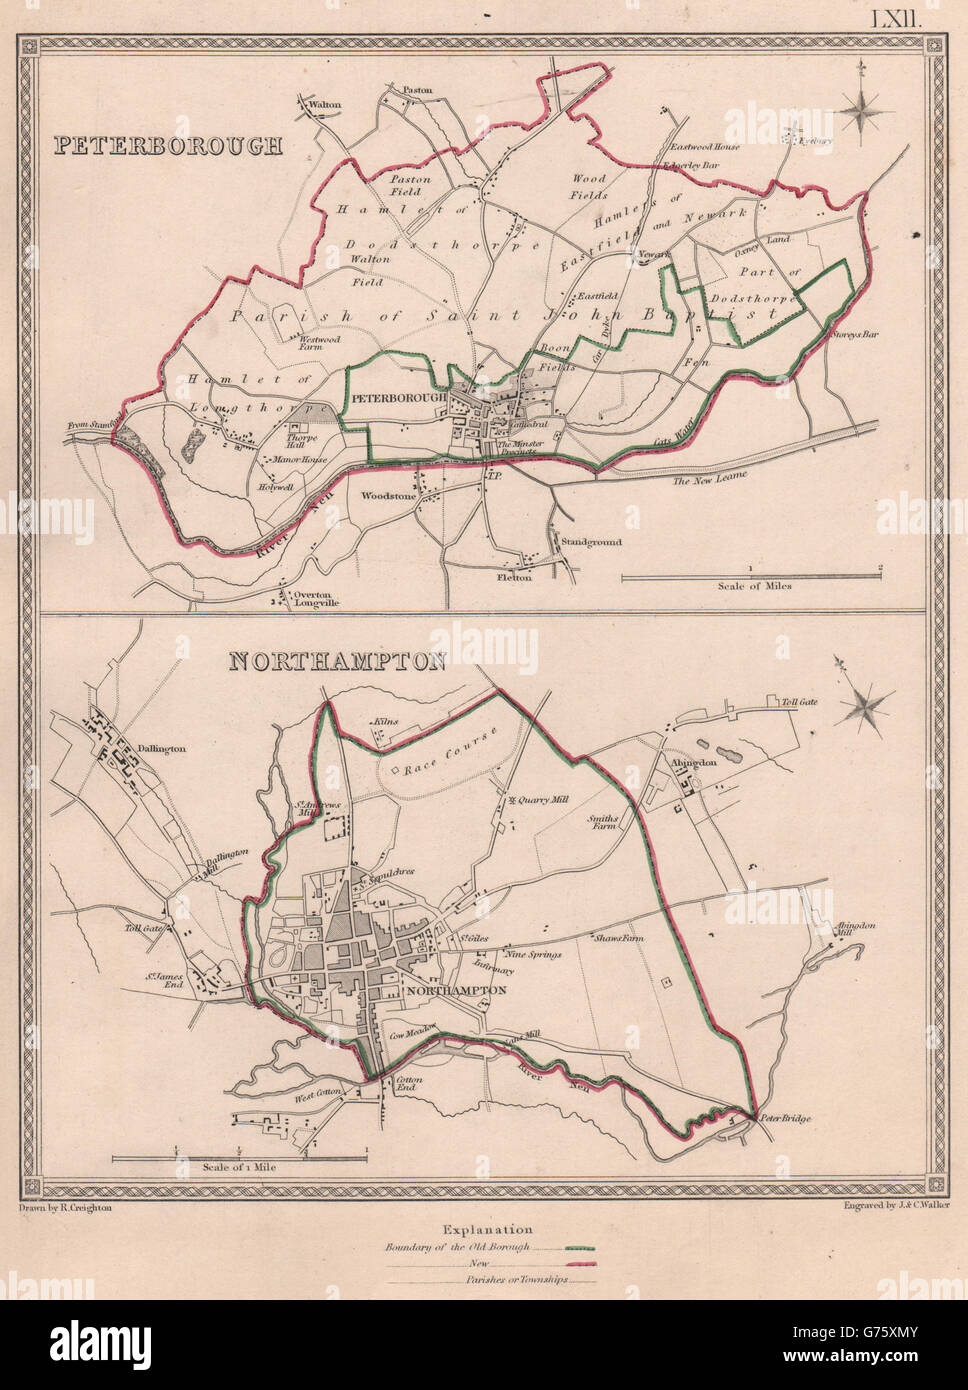 EAST MIDLANDS TOWNS. PeterNorthampton plans. CREIGHTON/WALKER, 1835 old map Stock Photo